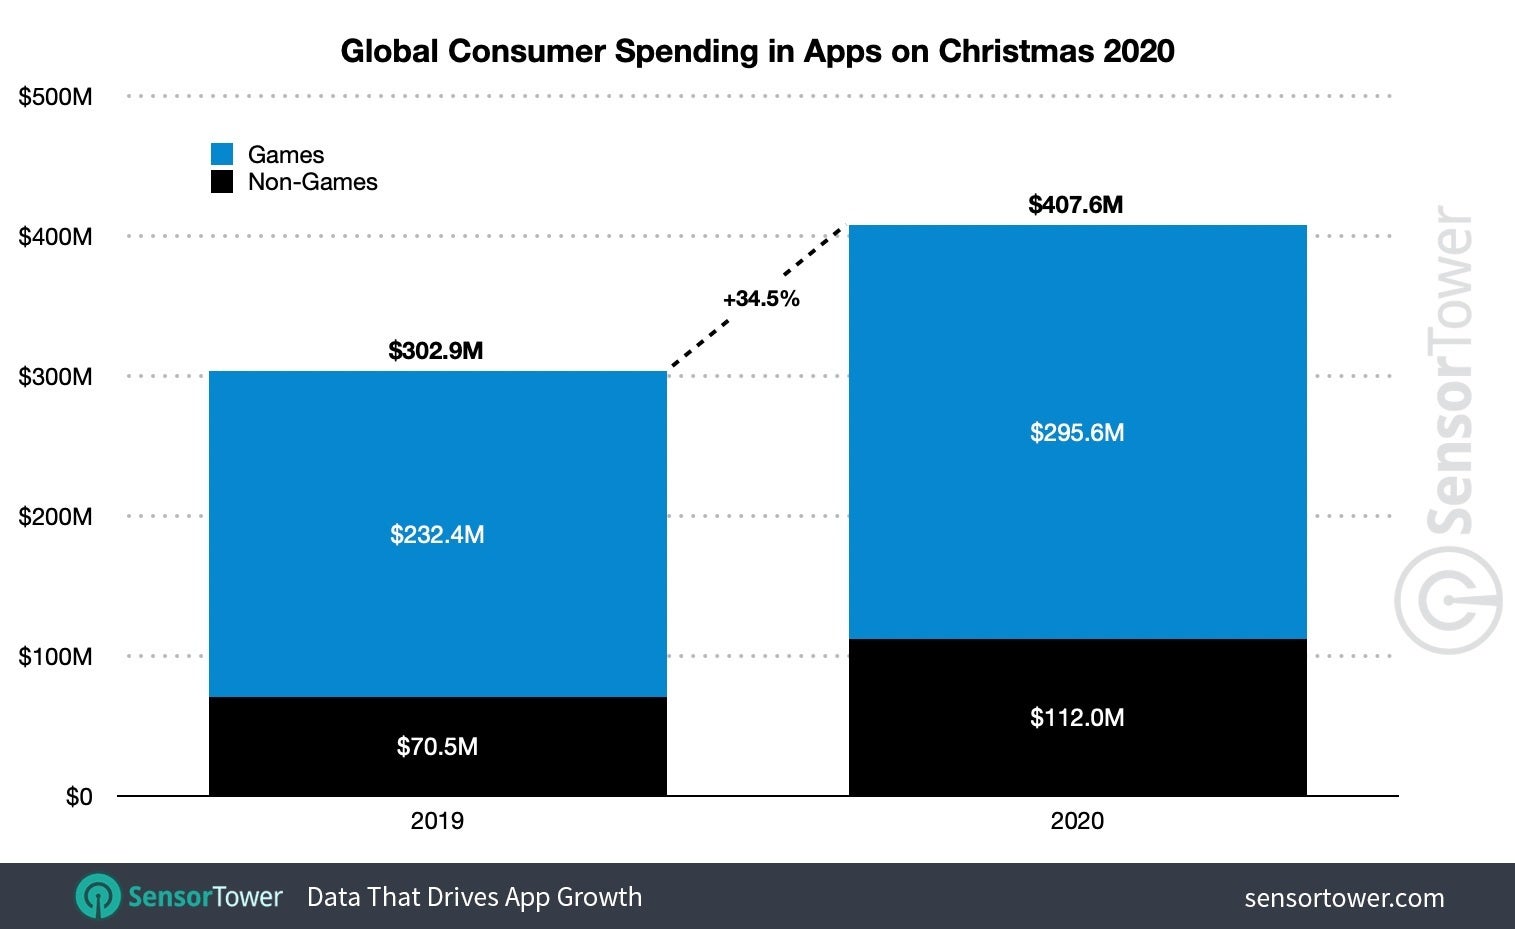 Global Consumer Spending in Apps on Christmas 2020 - The App Store grabs over 68% of global app revenue on Christmas day